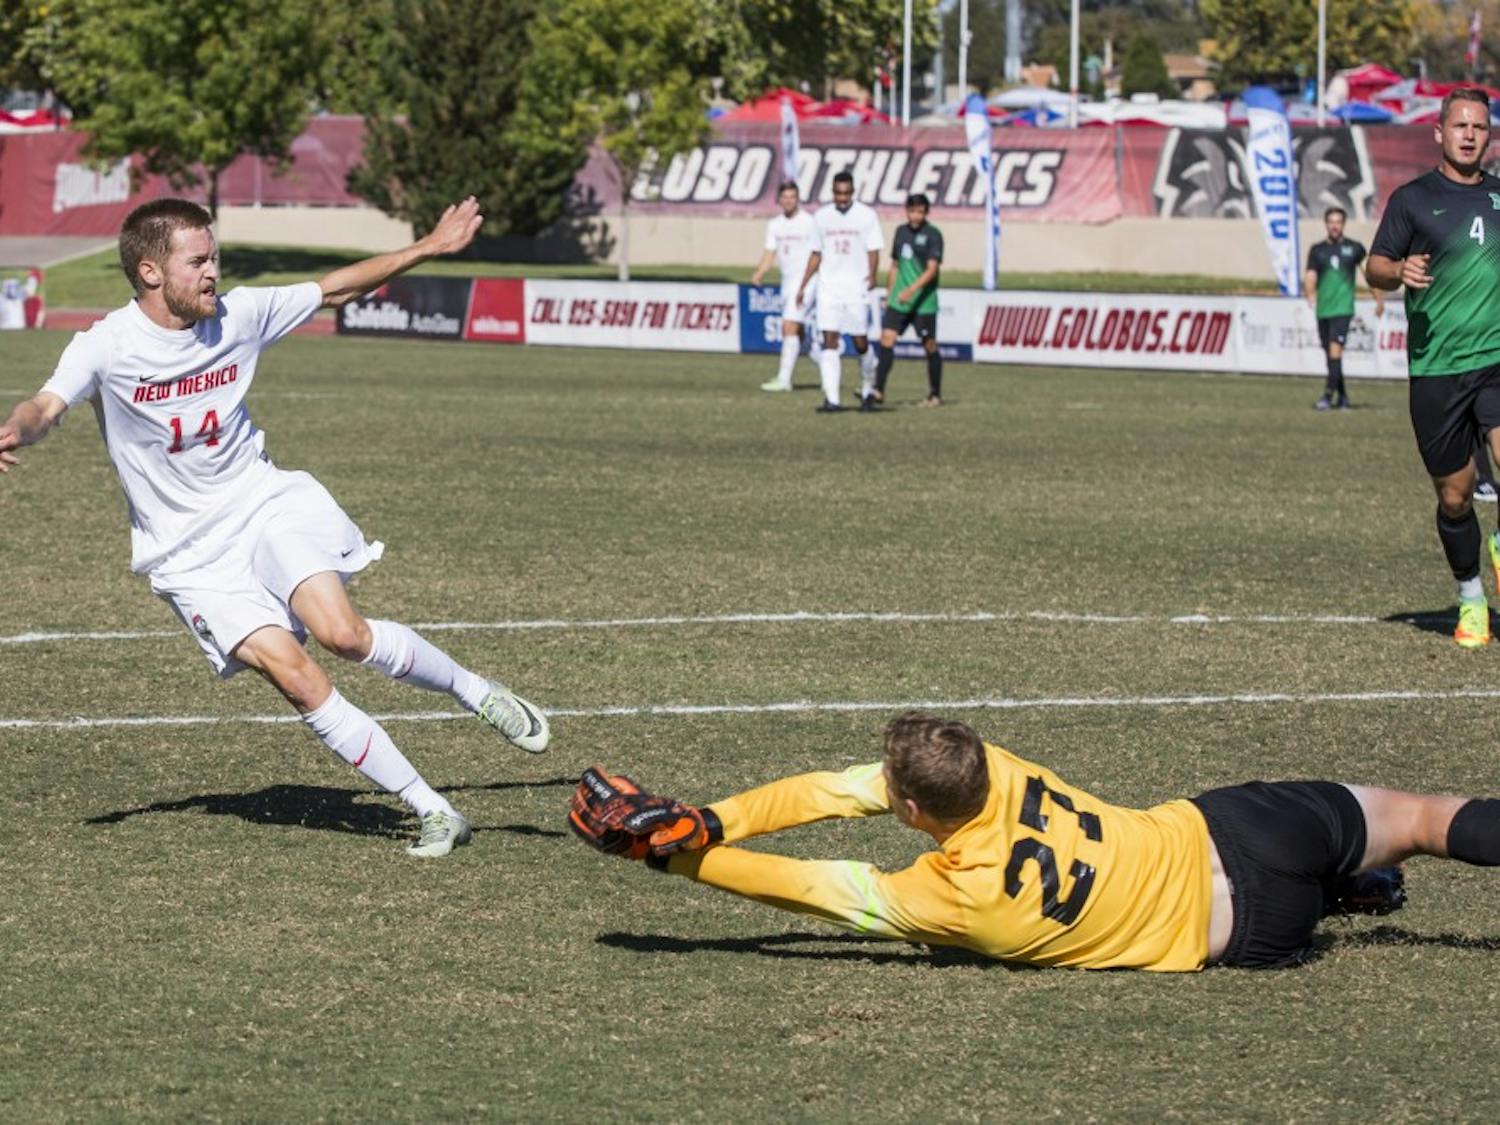 Redshirt senior midfielder Chris Wehan fires a shot past a Marshall goalkeeper to score the Lobos second goal at the UNM Soccer Complex Saturday, Oct. 22, 2016. The Lobos&nbsp;will play UAB this Wednesday.&nbsp;